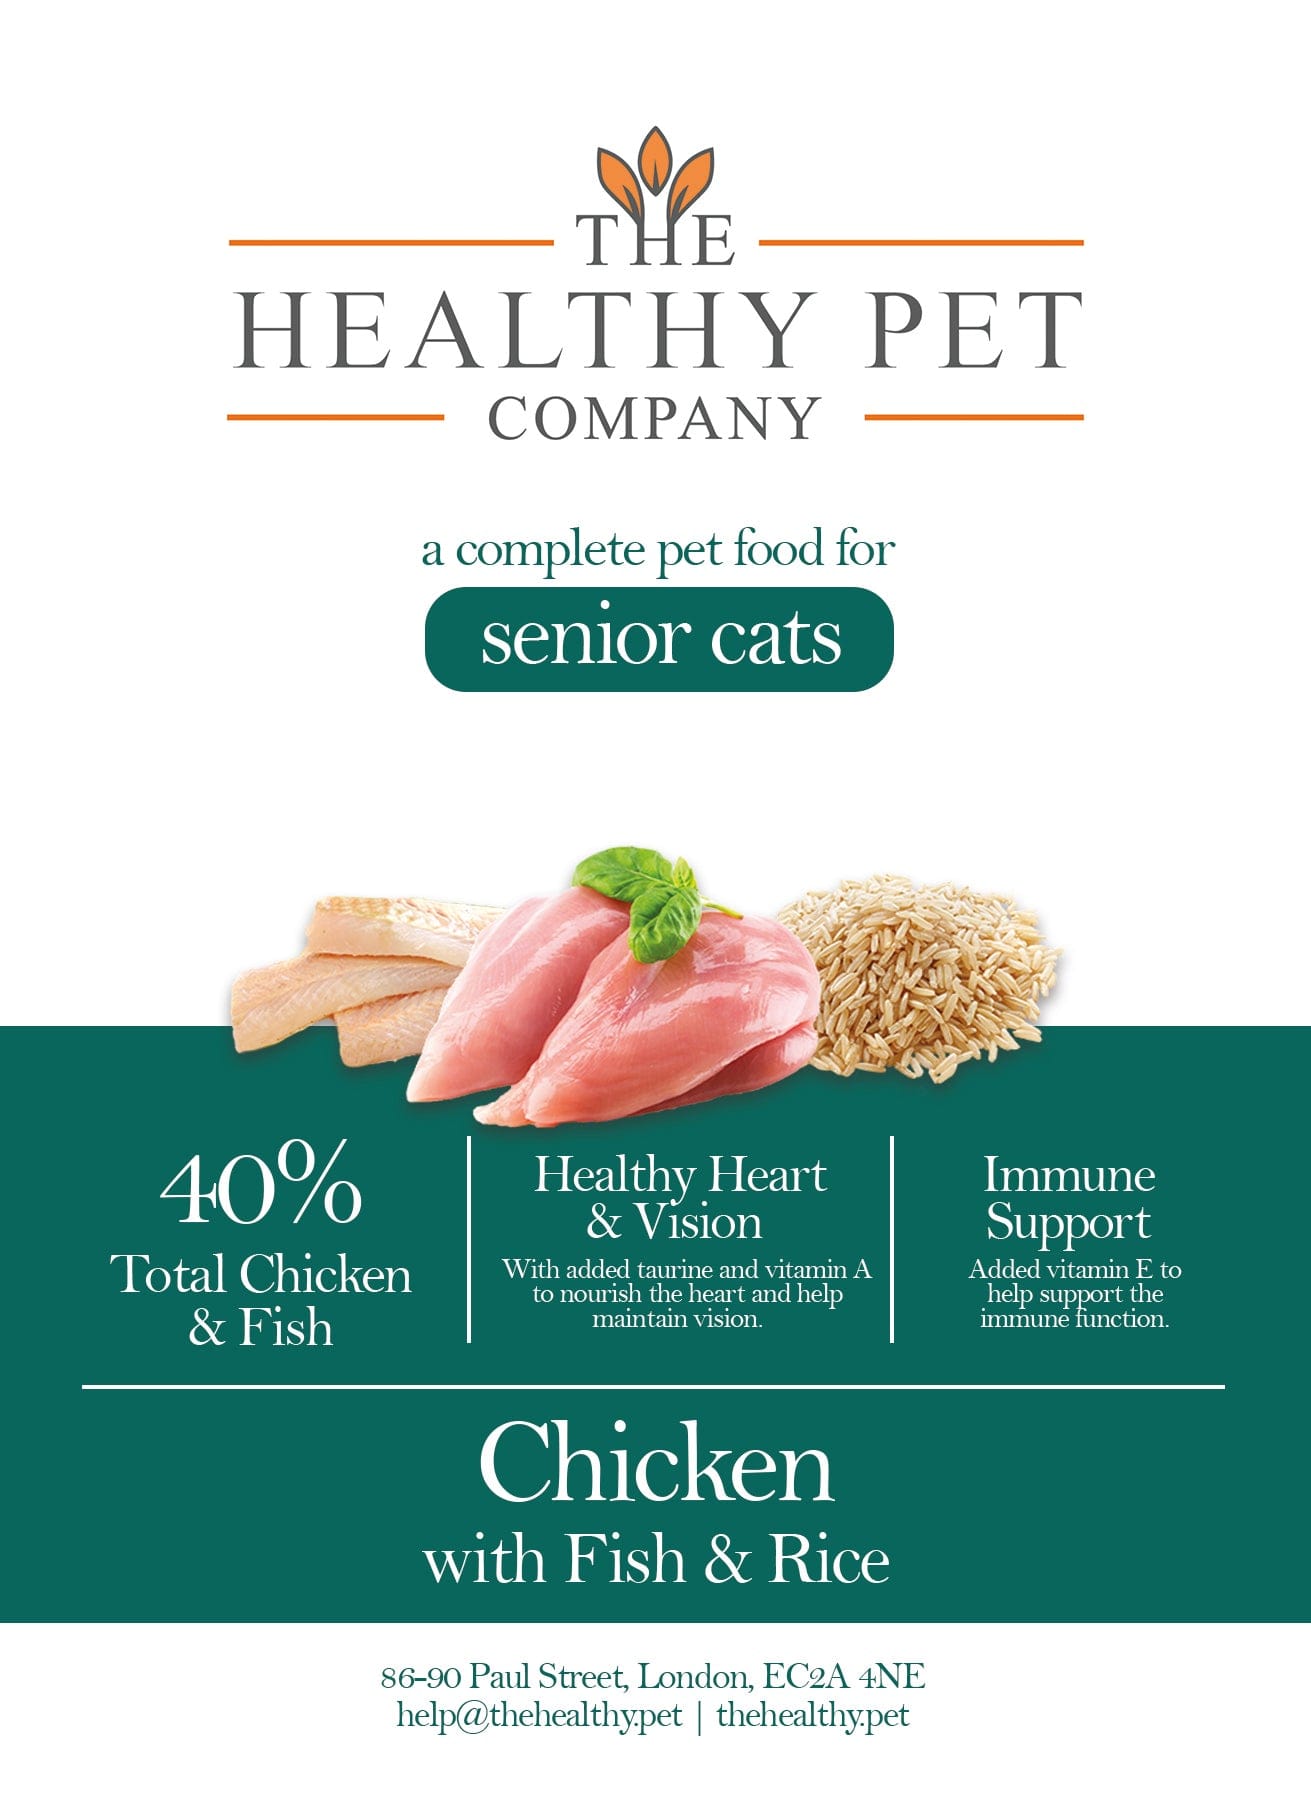 The Healthy Pet Company Complete Meal - Chicken & Fish with Rice for Senior Cats - The Healthy Pet Company